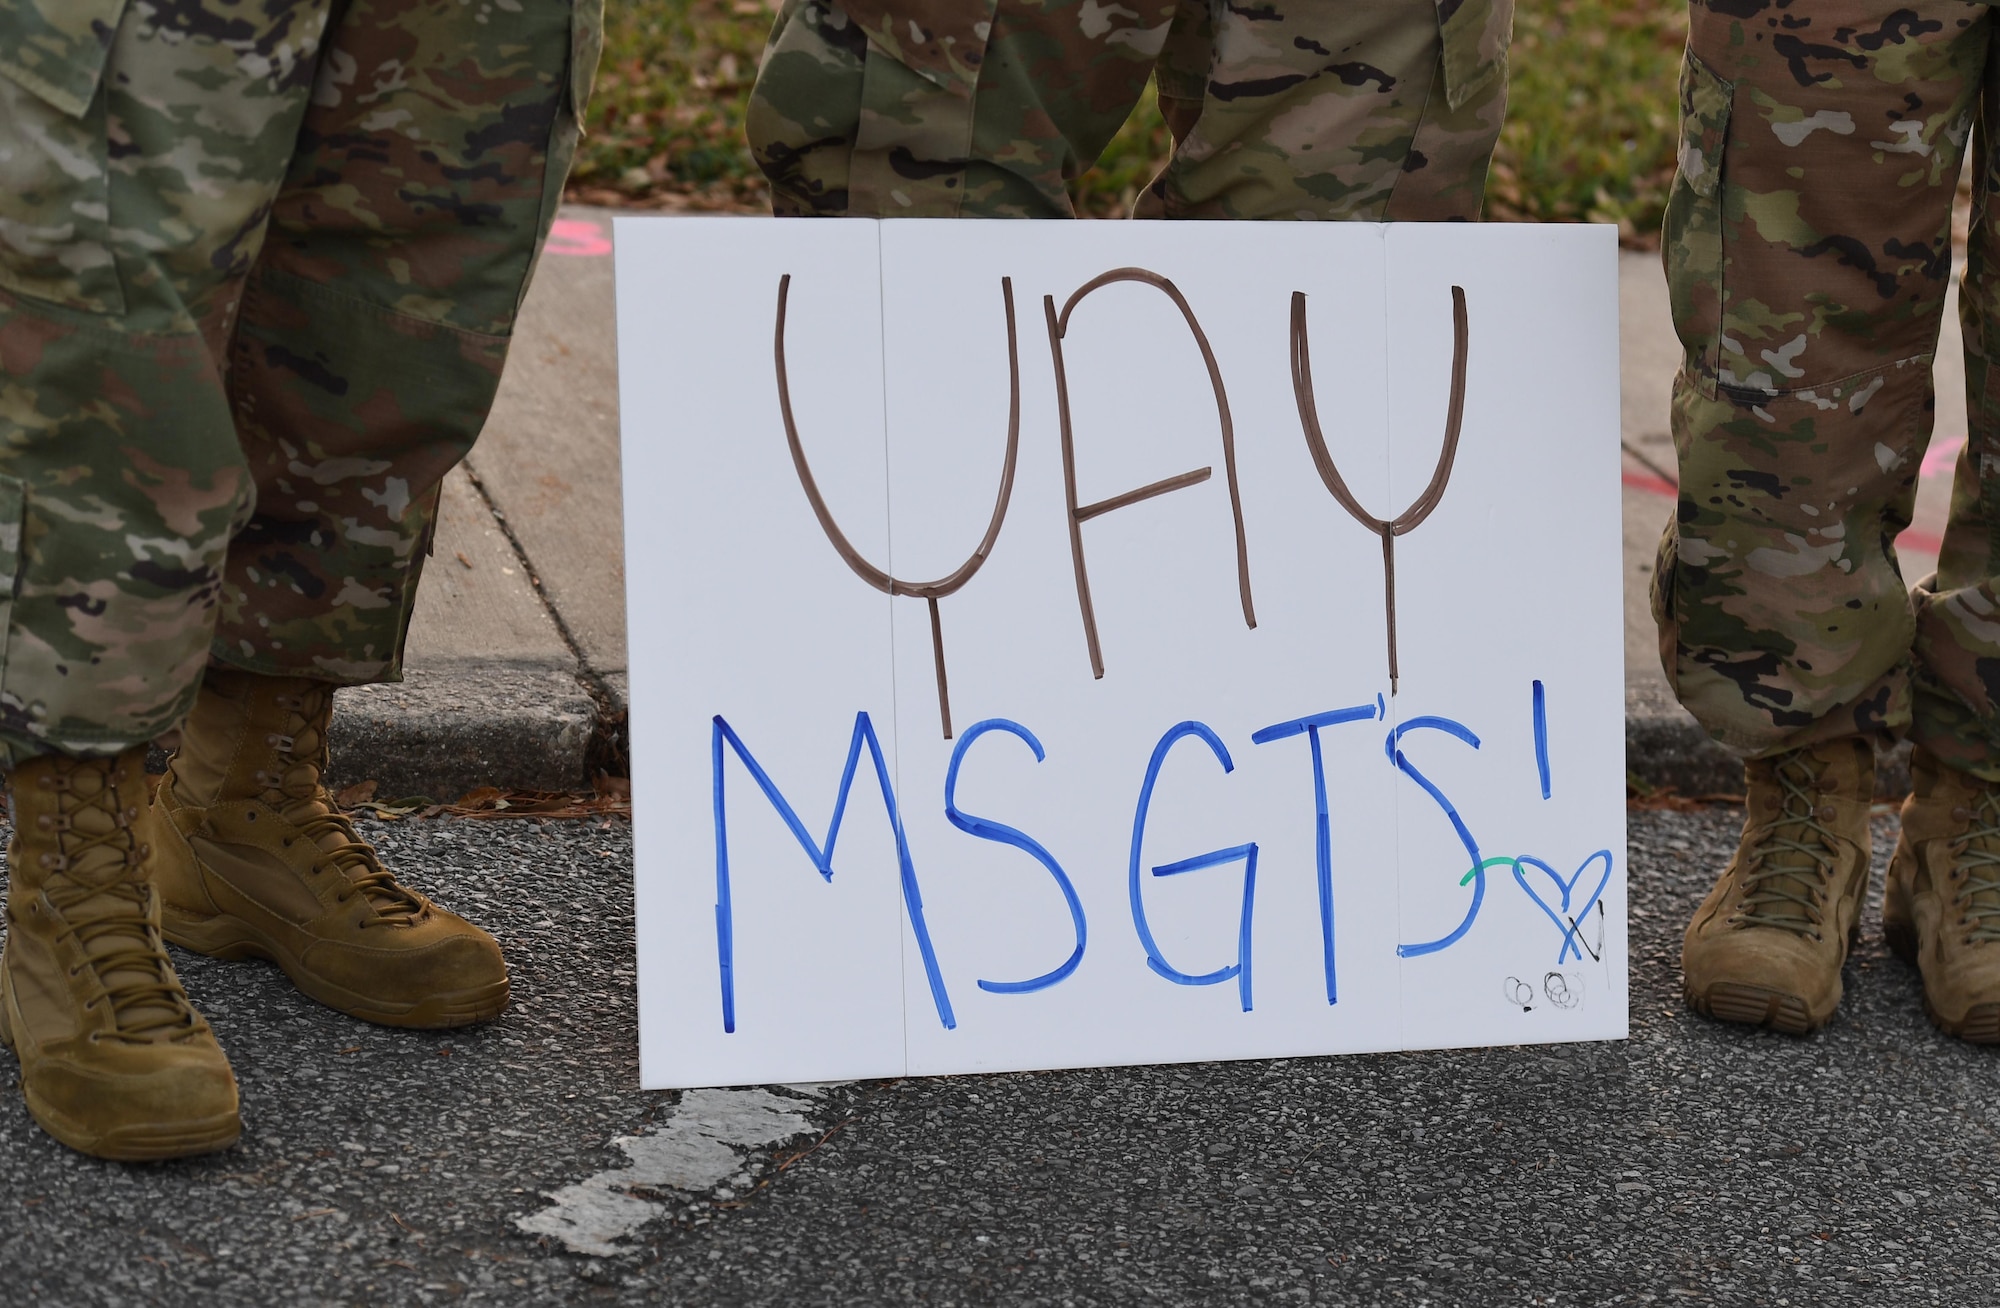 A hand-made sign is on display during the Keesler Senior Noncommissioned Officer Induction Ceremony outside Mathies Hall at Keesler Air Force Base, Mississippi, Nov. 19, 2020. Over 20 Airmen were recognized during the ceremony, which also included a drive-thru congratulatory parade by Keesler personnel. (U.S. Air Force photo by Kemberly Groue)